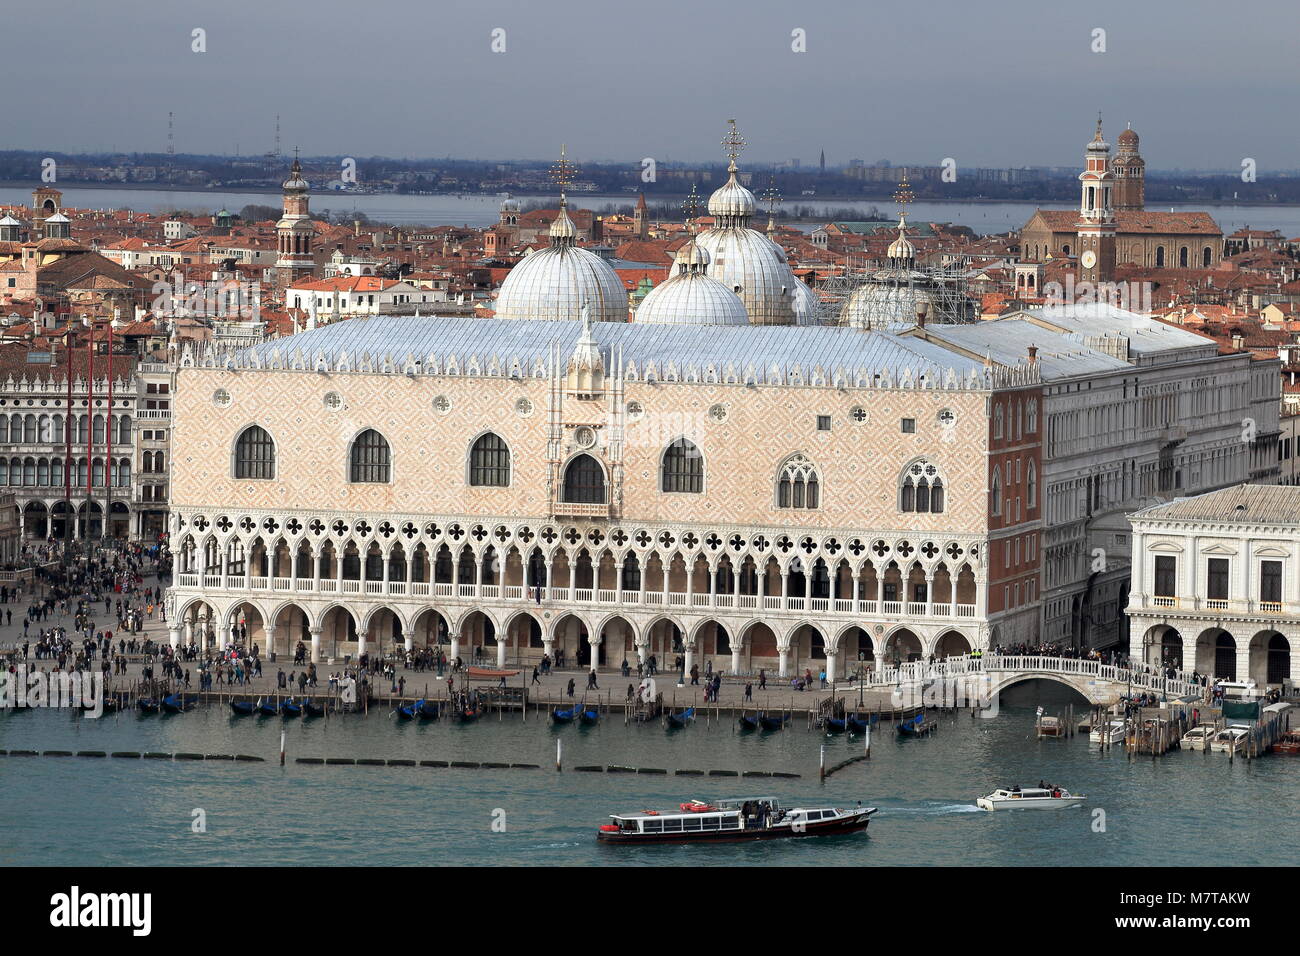 Venice, Italy - January 20, 2018. View of Palazzo Ducale from the top of the belltower of San Giorgio Maggiore church. Stock Photo